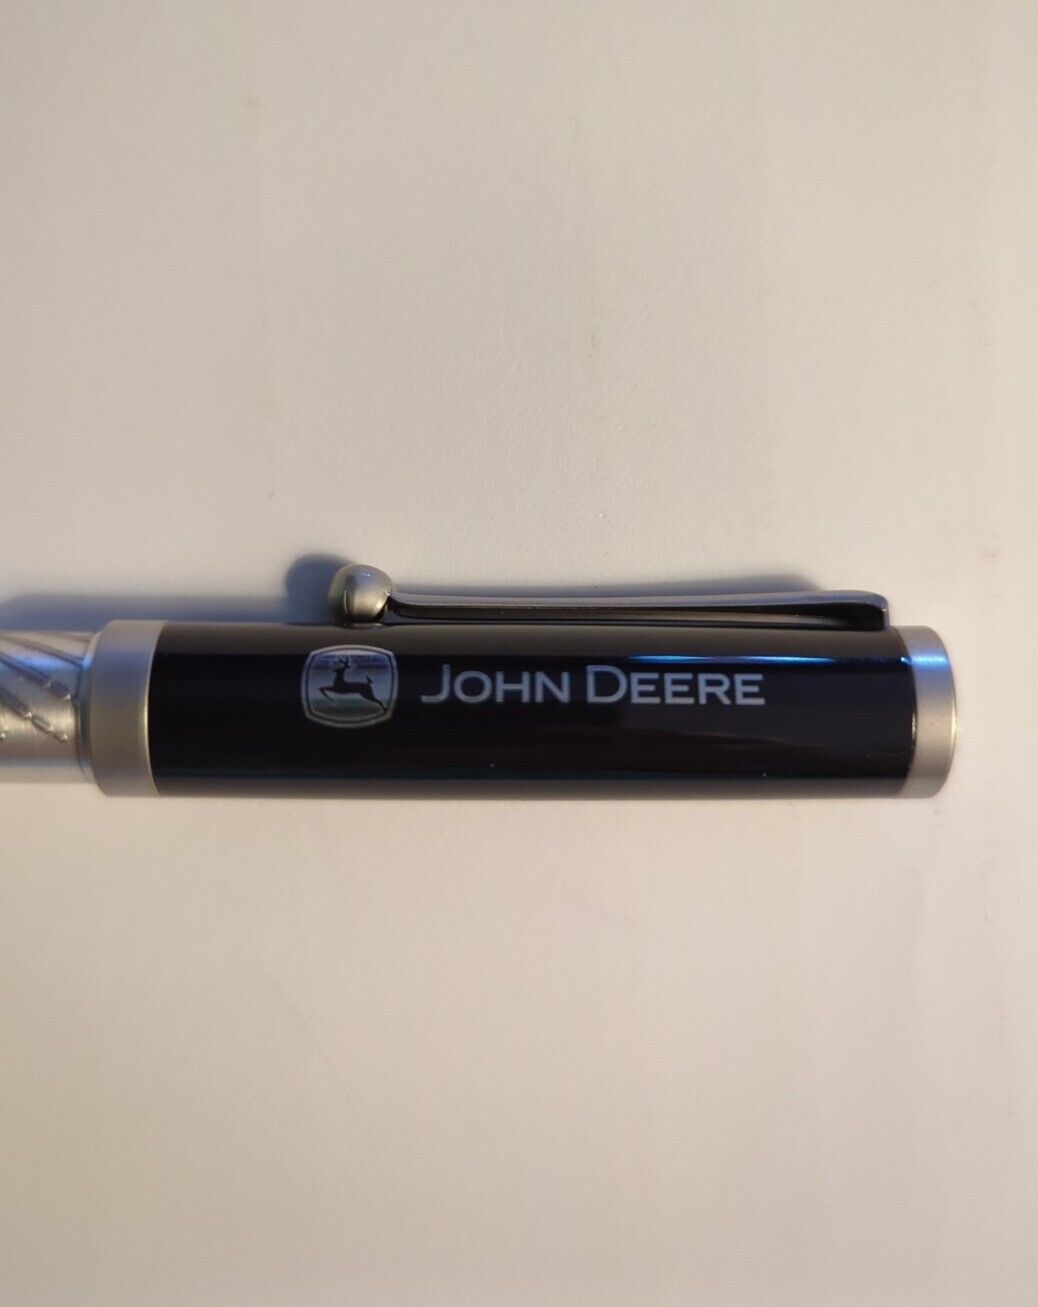 JOHN DEERE 175 Year Anniversary Etched Ball Point Pen Employee Gift 